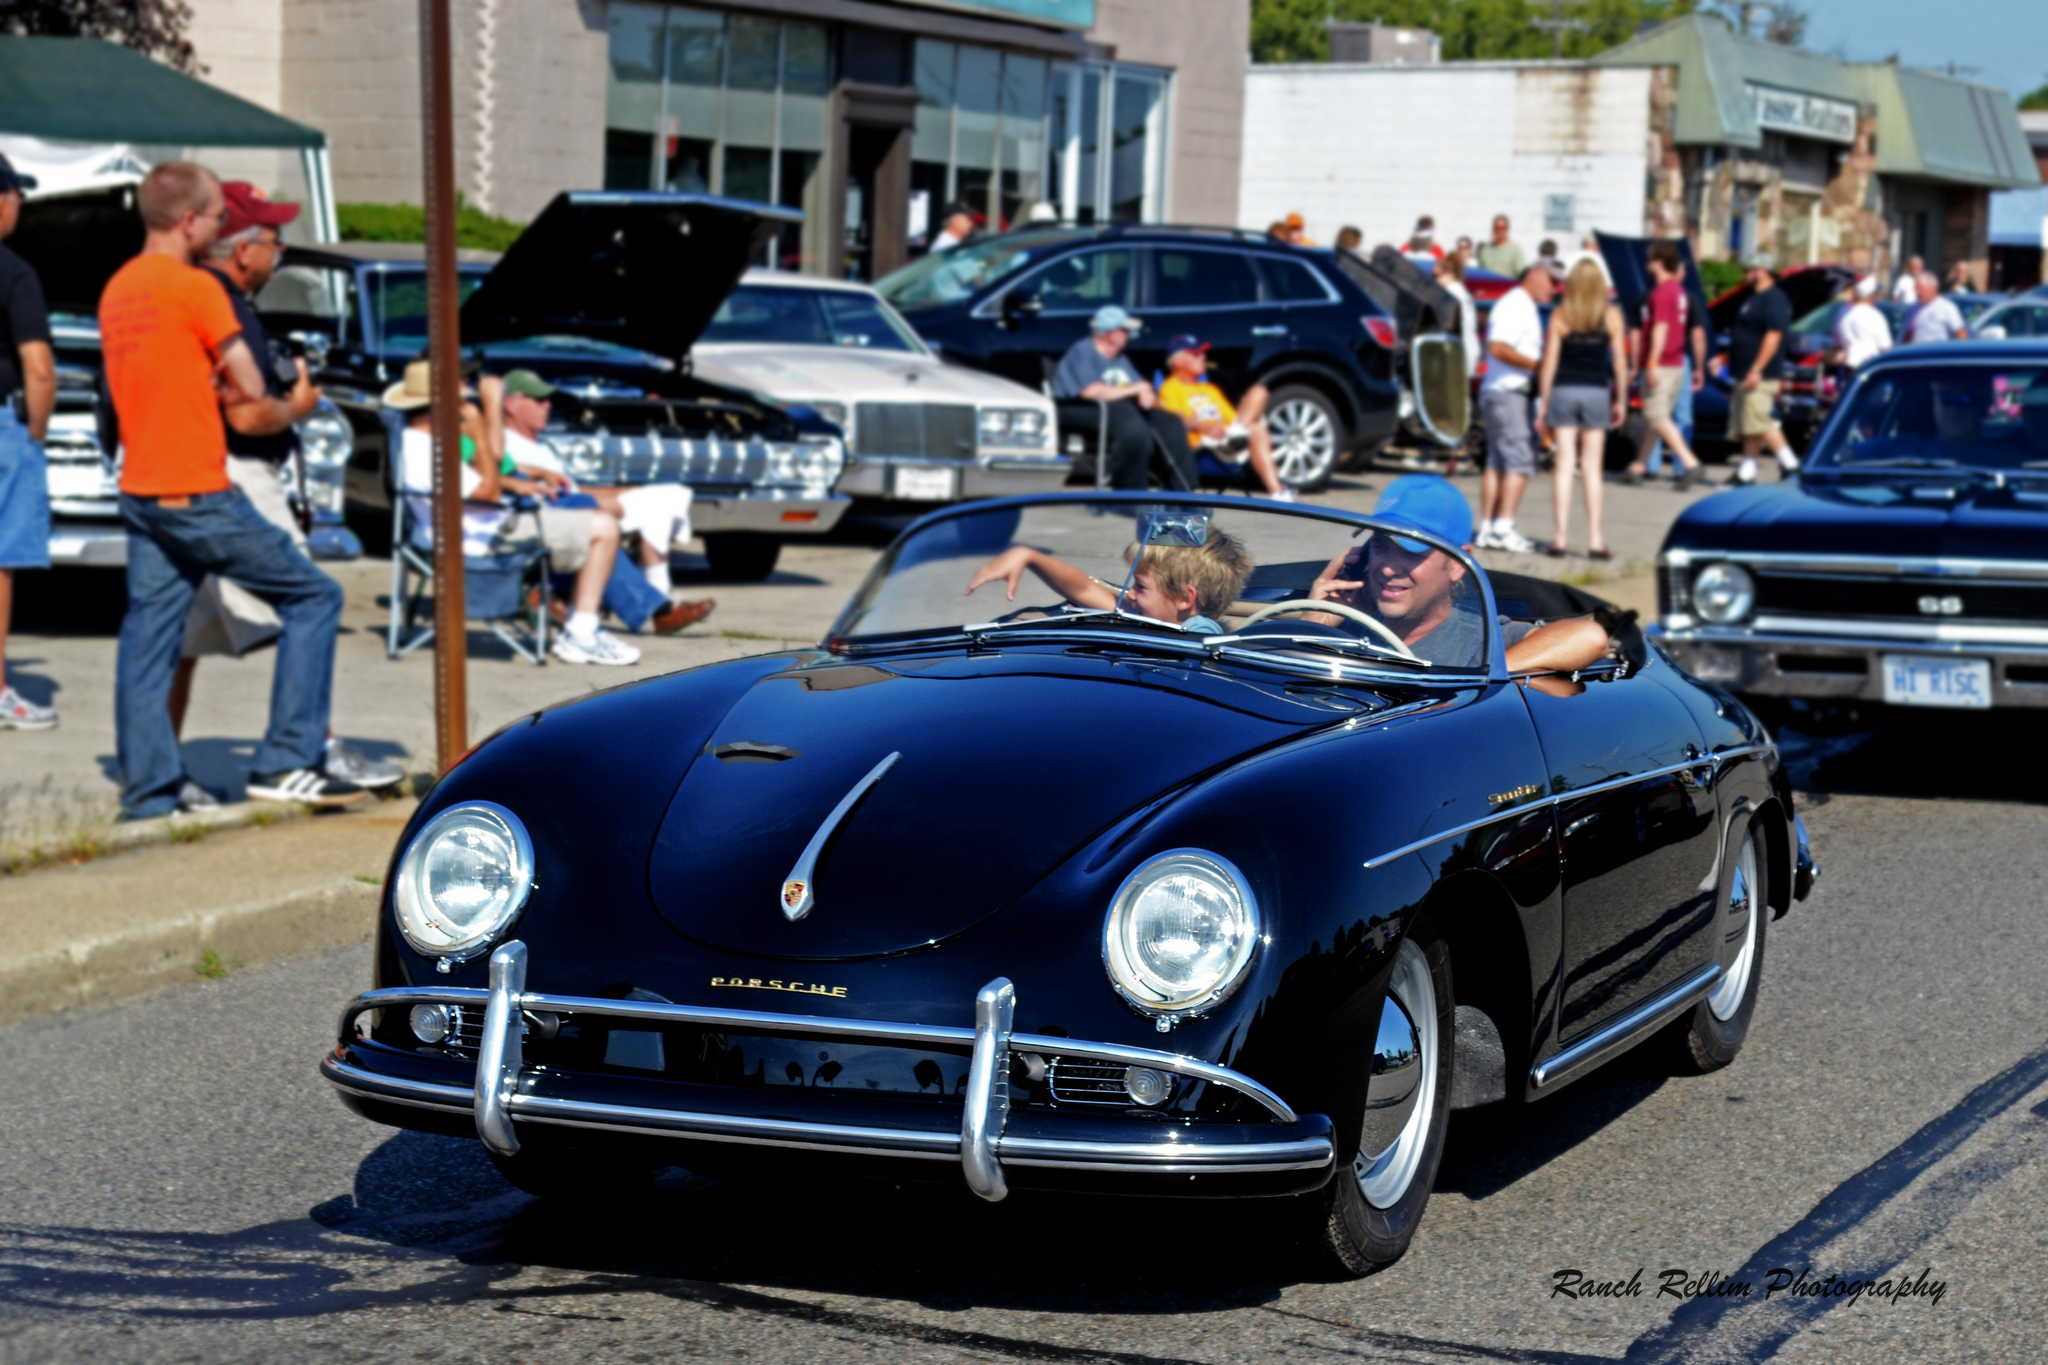 Woodward Dream Cruise 2013 - Ranch Rellim Photography (2)